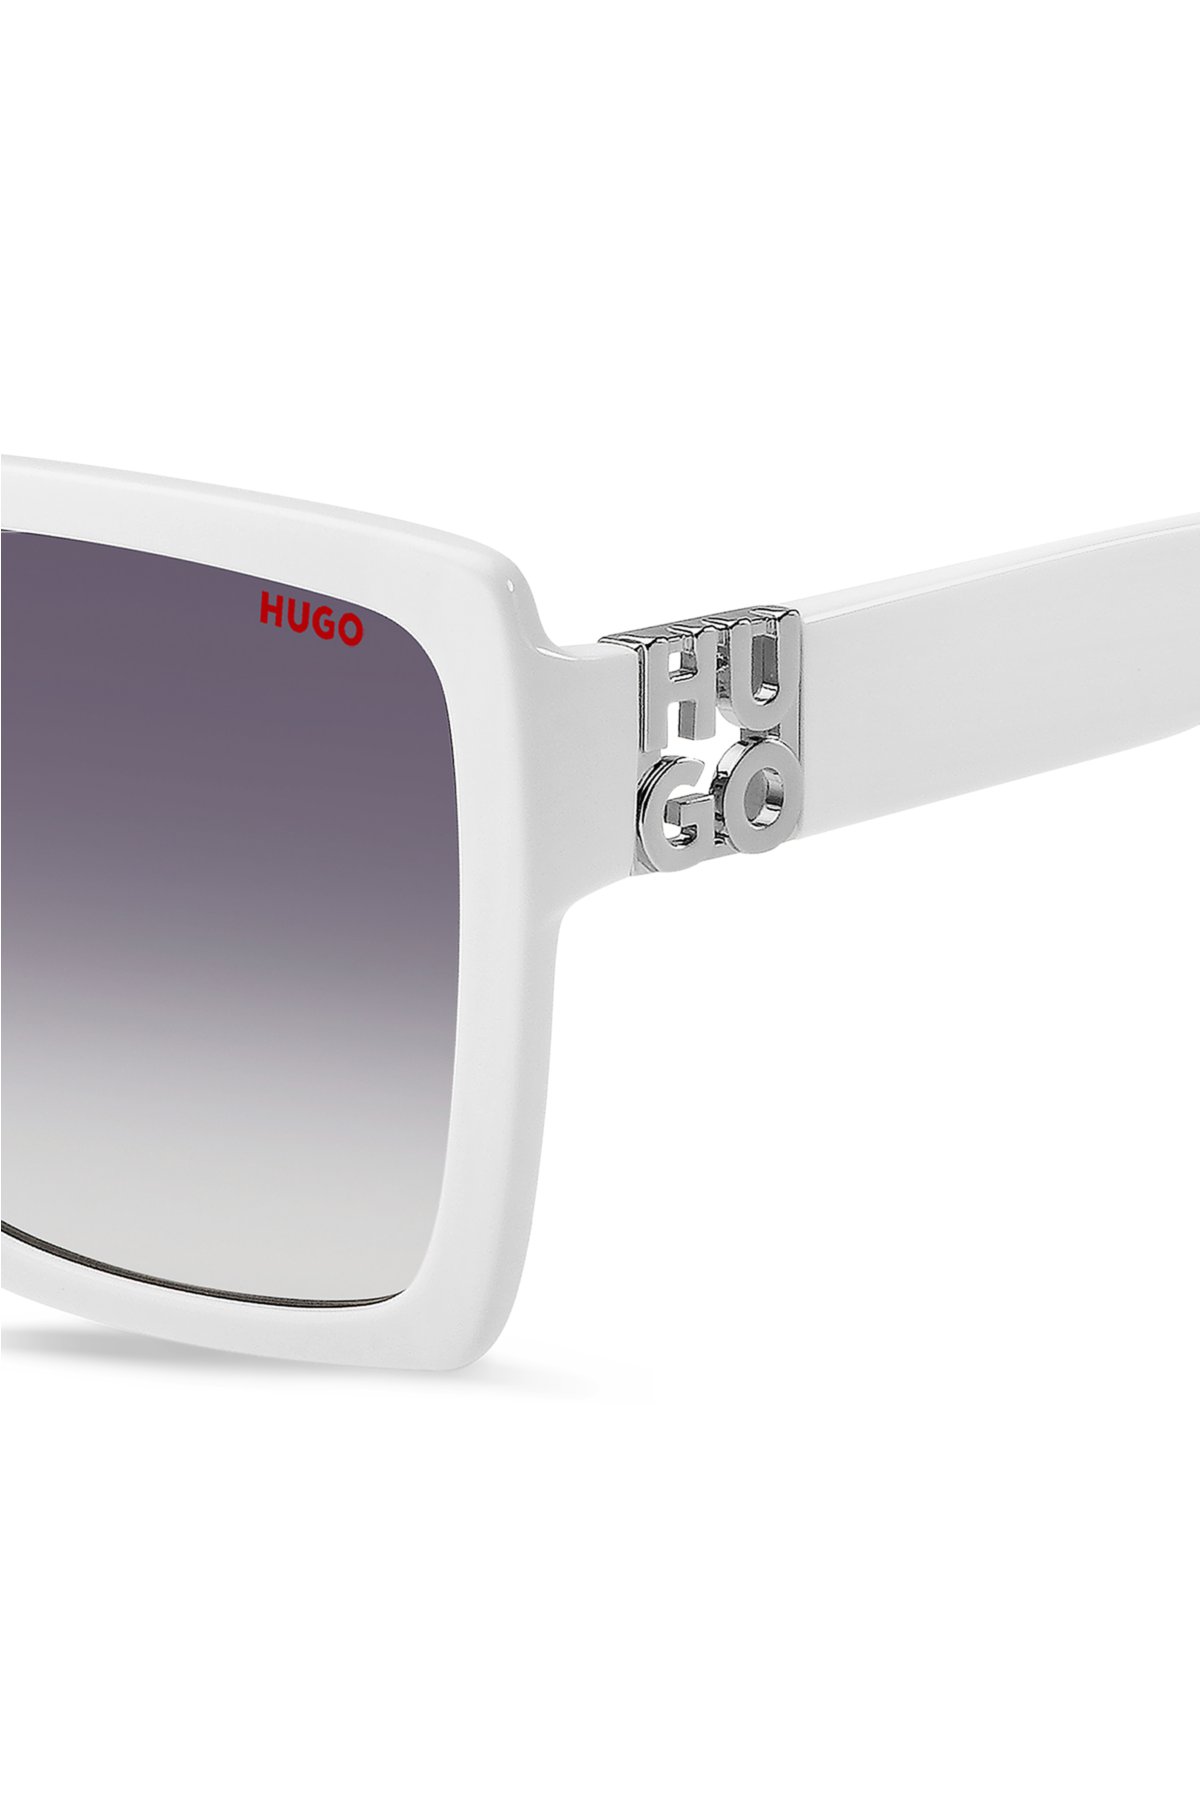 White-acetate sunglasses with stacked logo, White